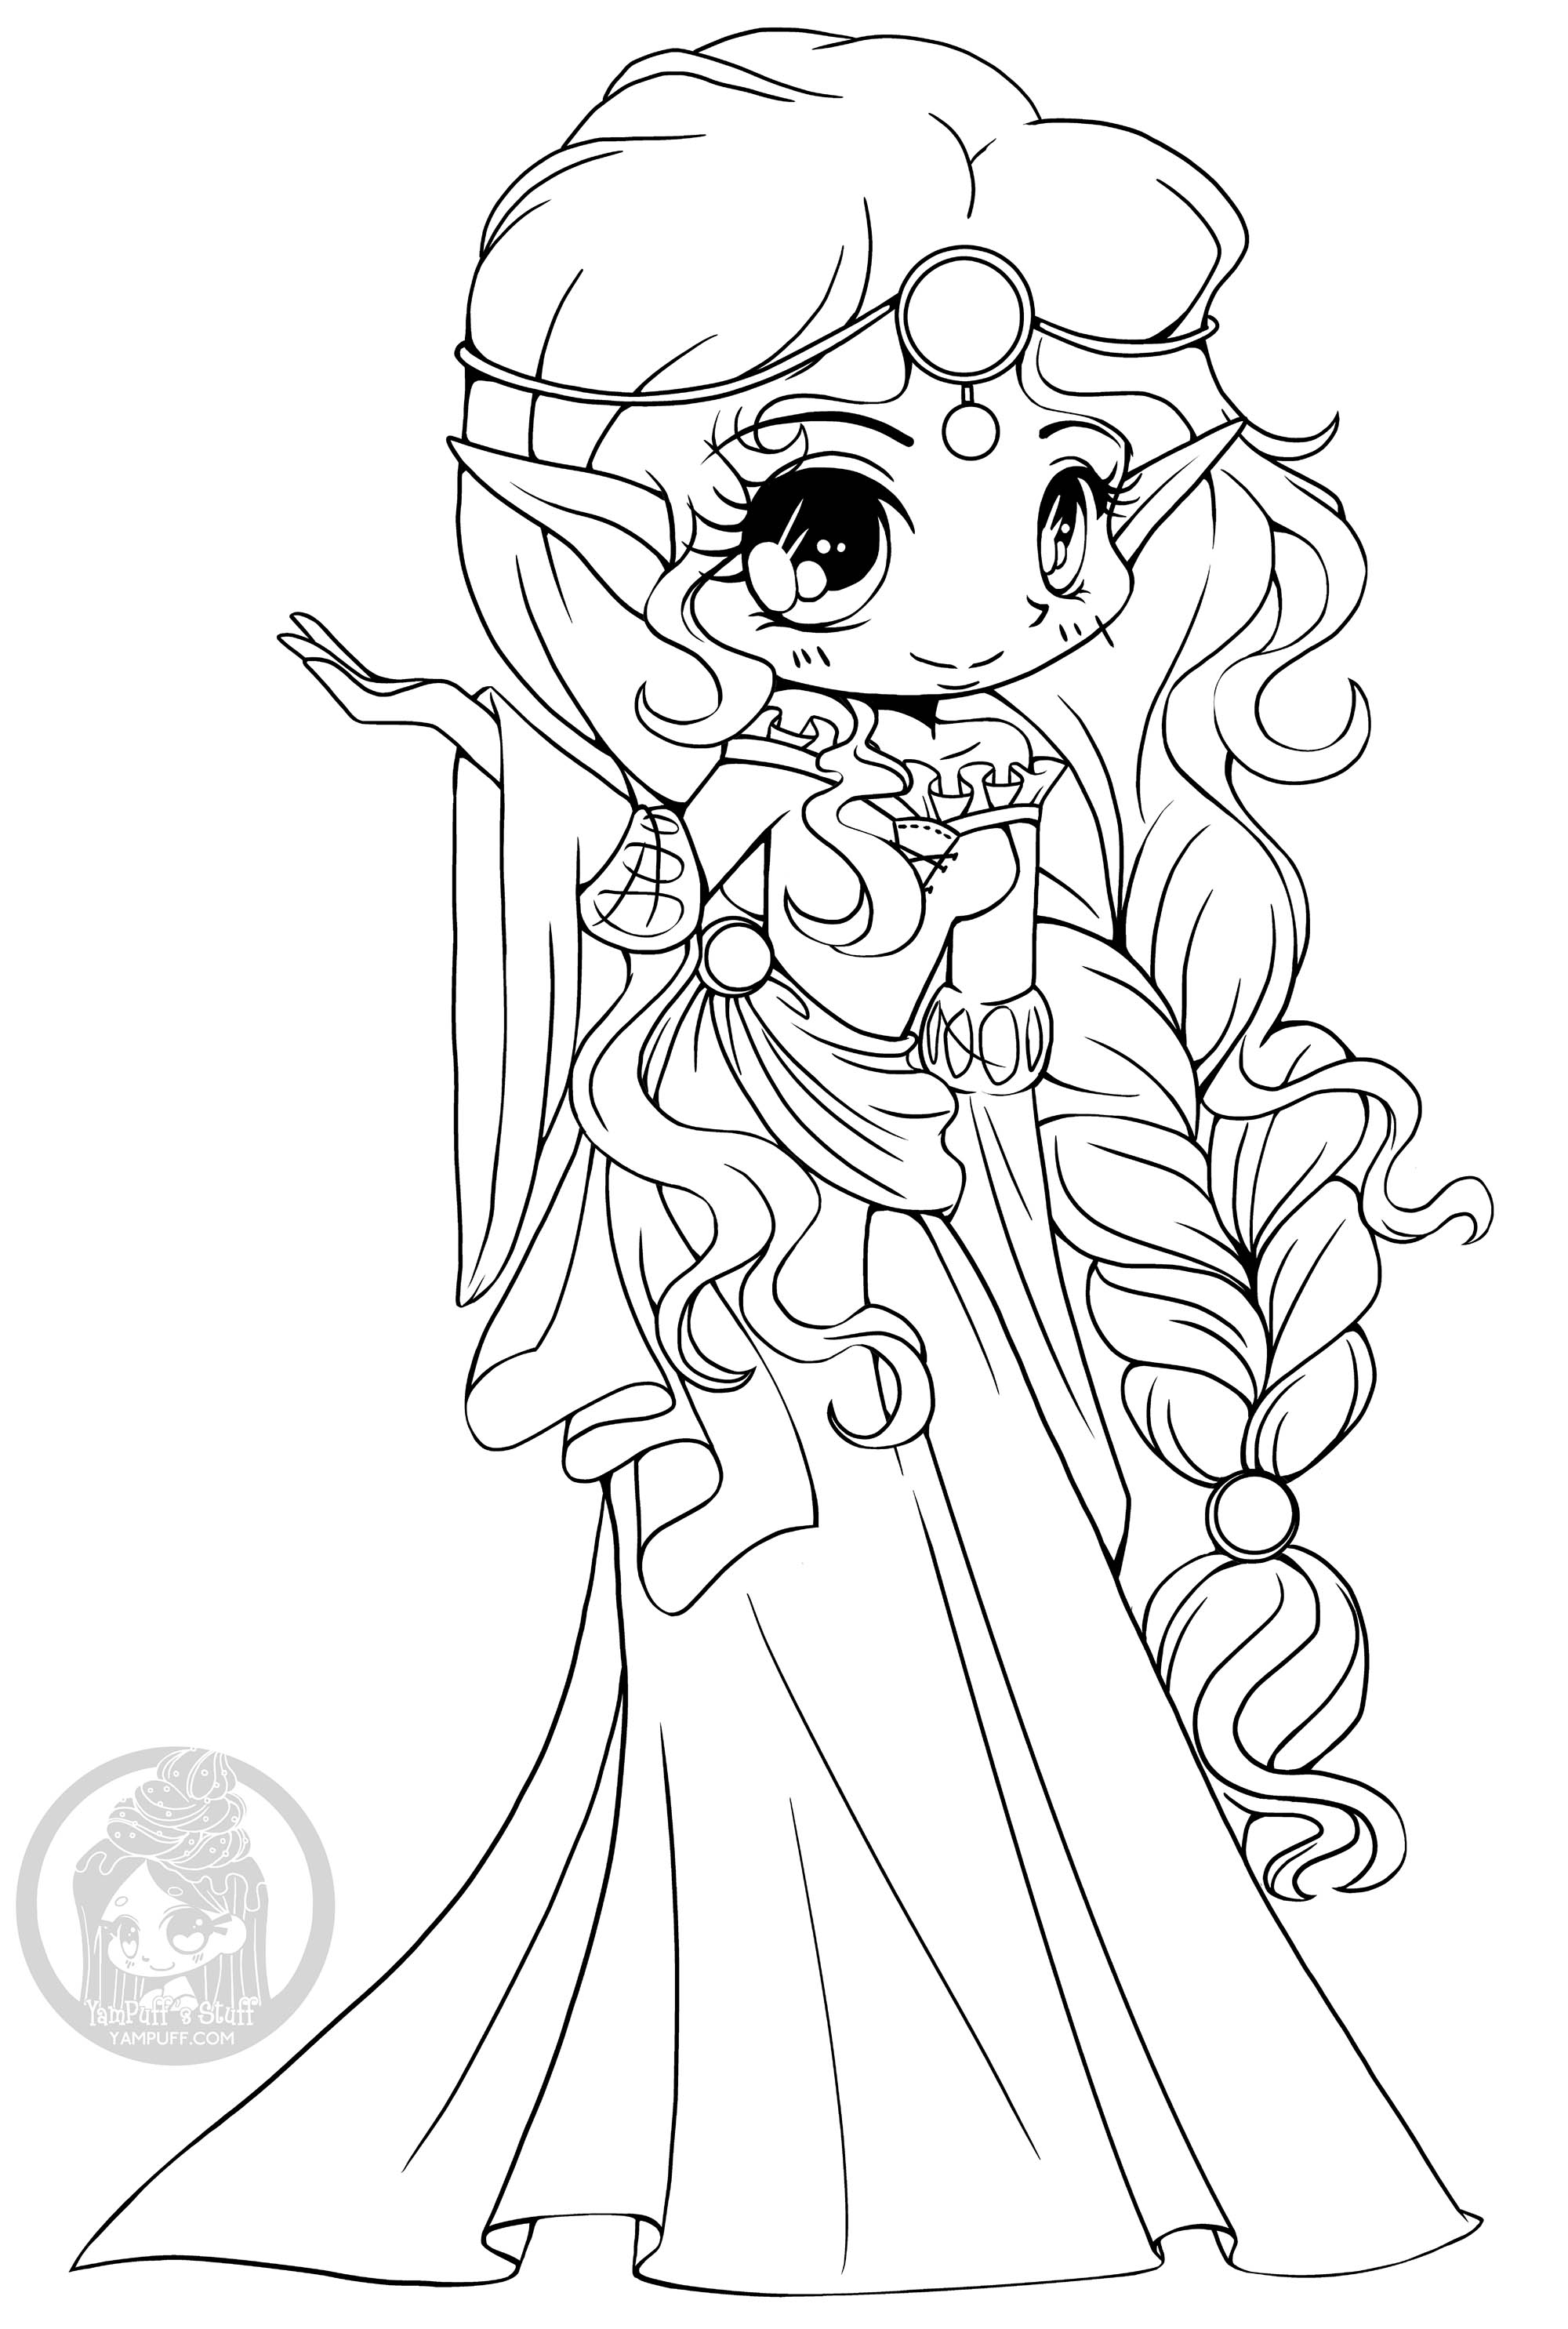 This elf princess will shows you her kingdom if you color her !, Artist : Yampuff